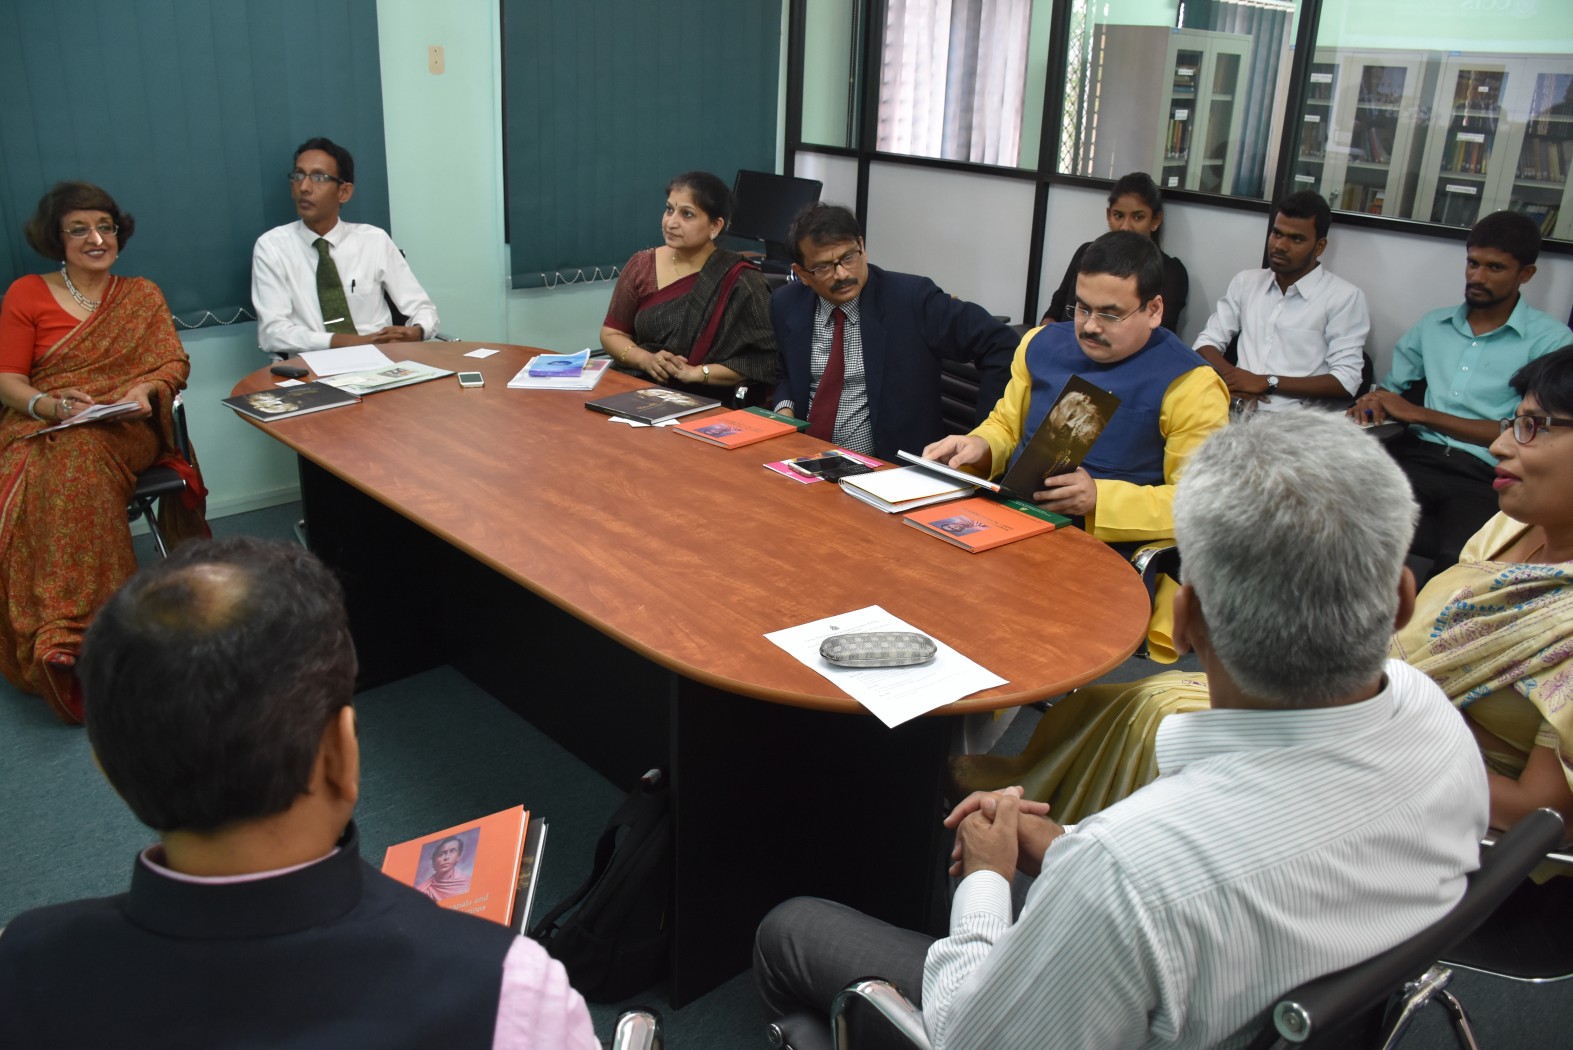 ICCR visited University of Colombo3